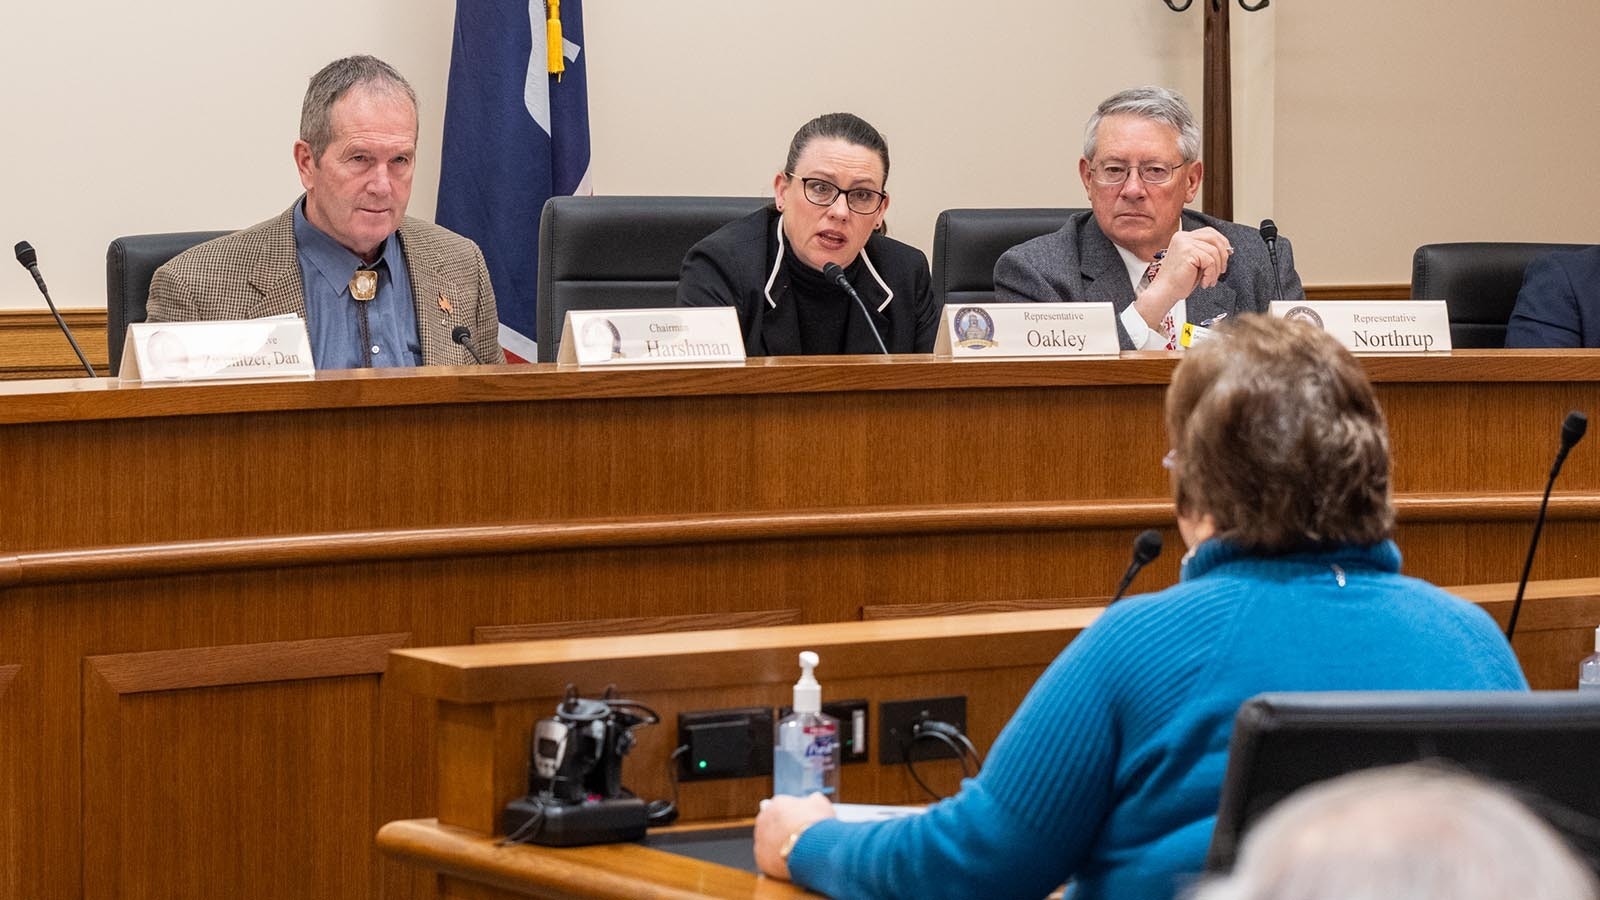 House Revenue Committee Chairman Reps. Steve Harshman, from left, Ember Oakley and David Northrup hear testimony about property tax bills during a Friday meeting at the Capitol in Cheyenne.